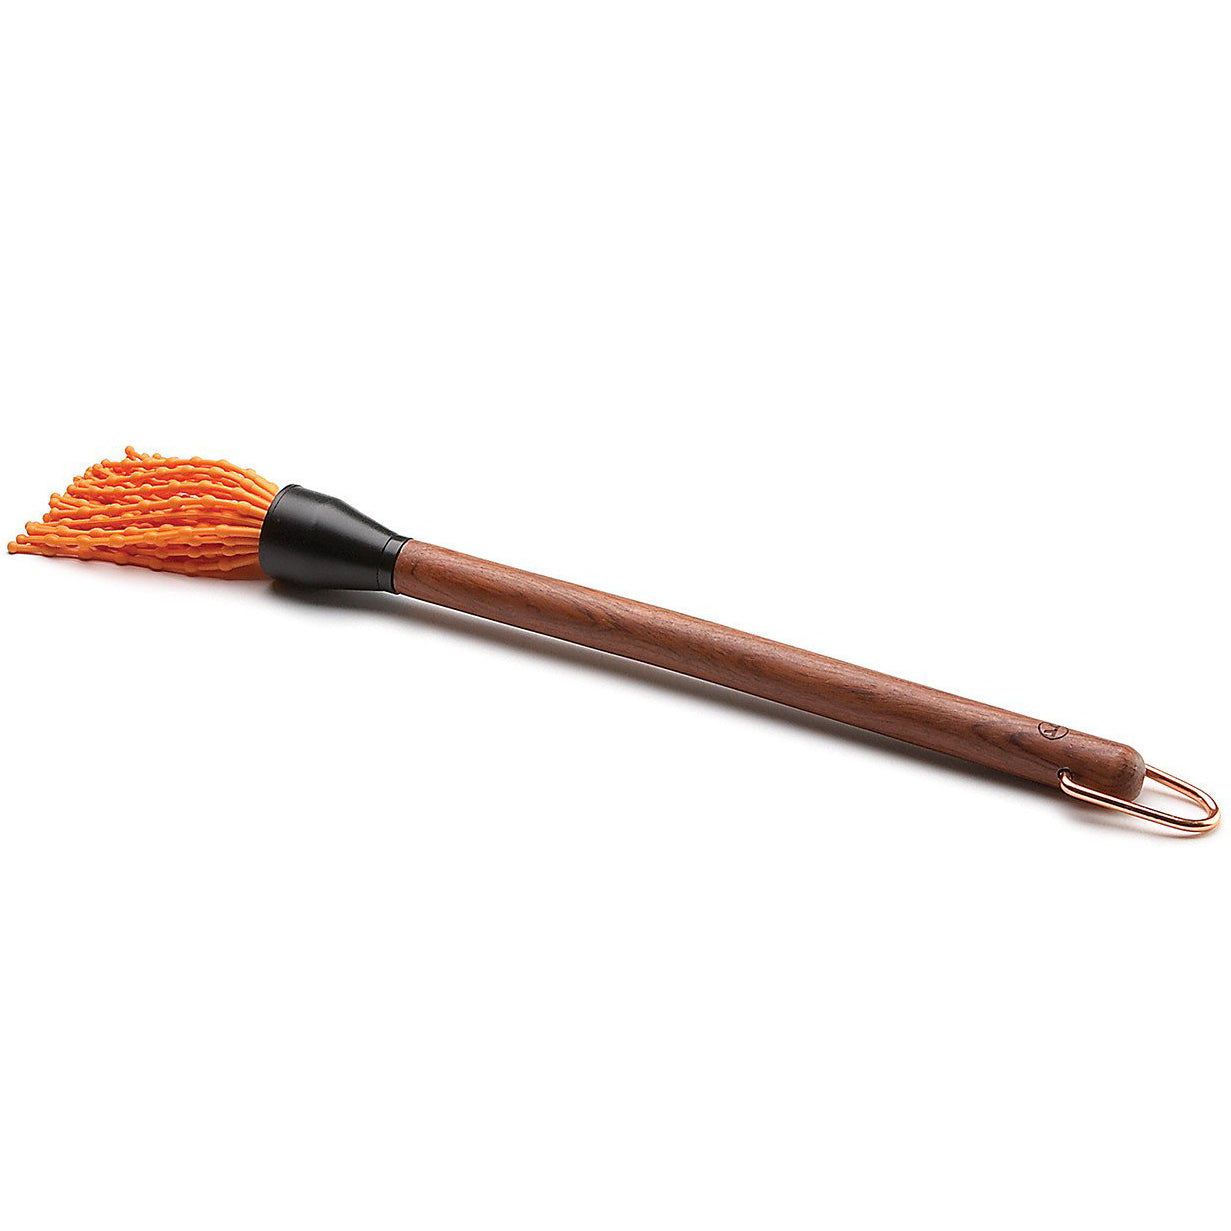 Outset Rosewood Silicone Sop Mop Outset Indigo Pool Patio BBQ